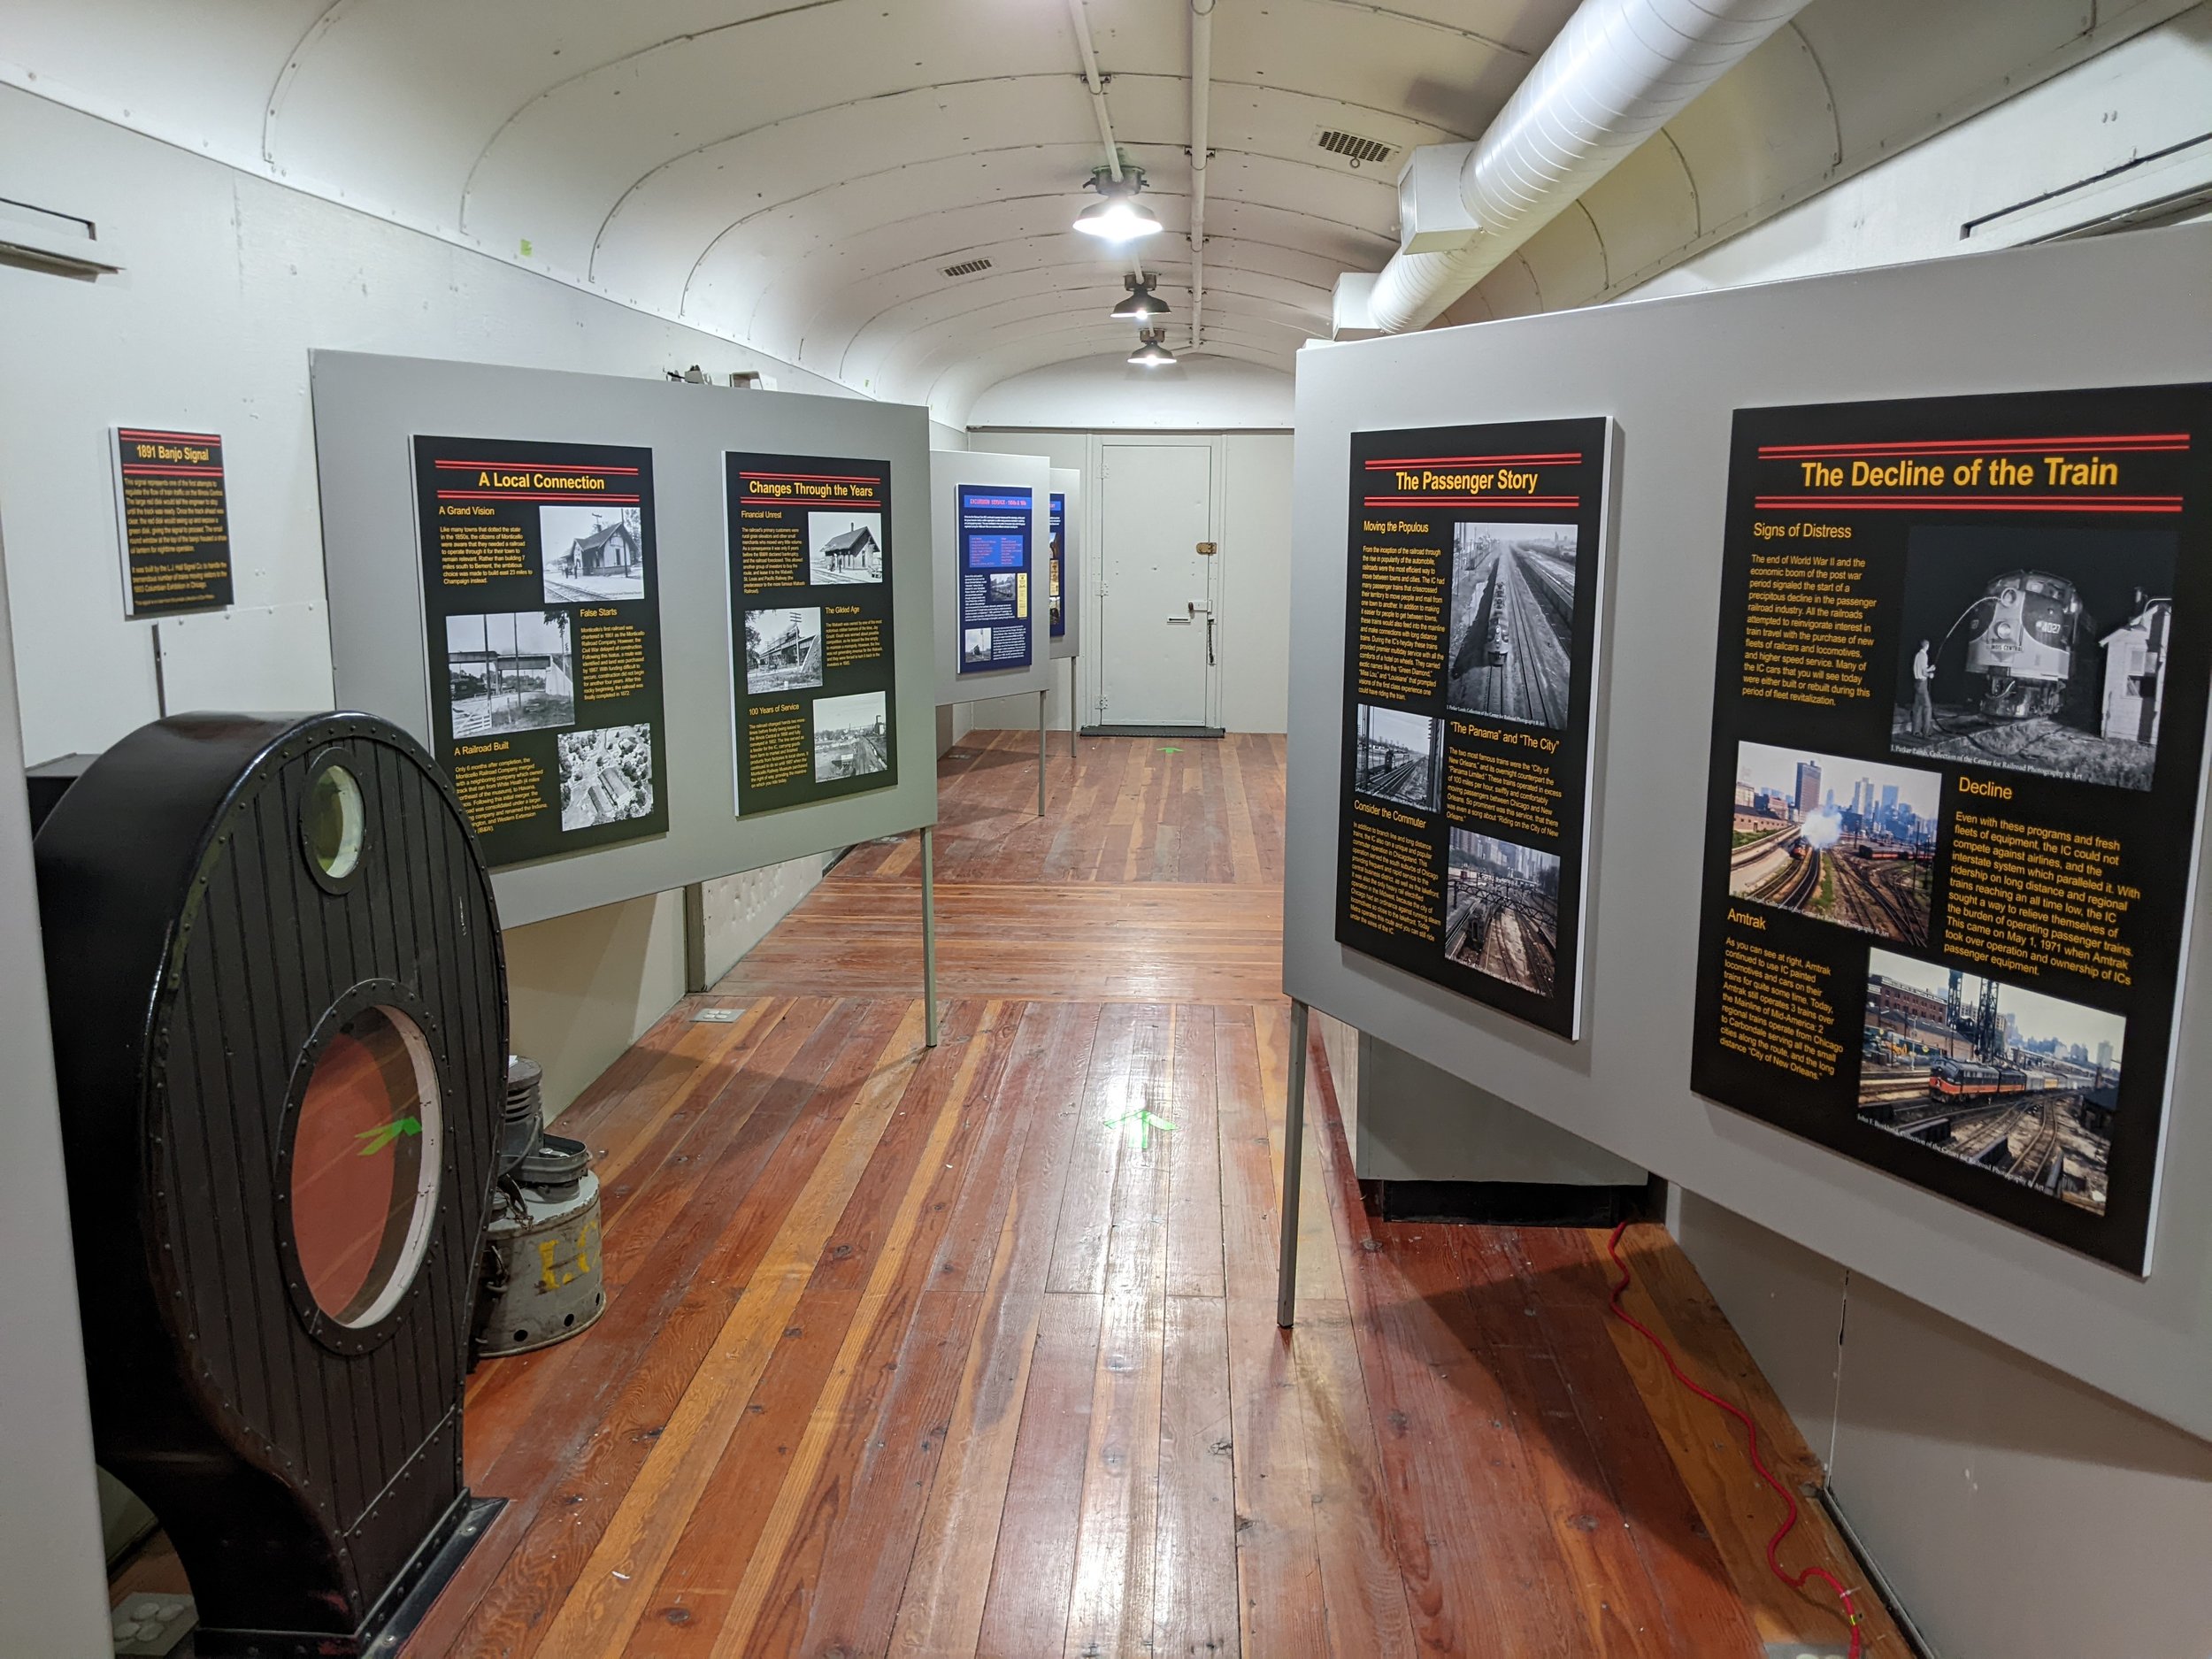  The exhibits include a series on the history of railroads in the United States.  